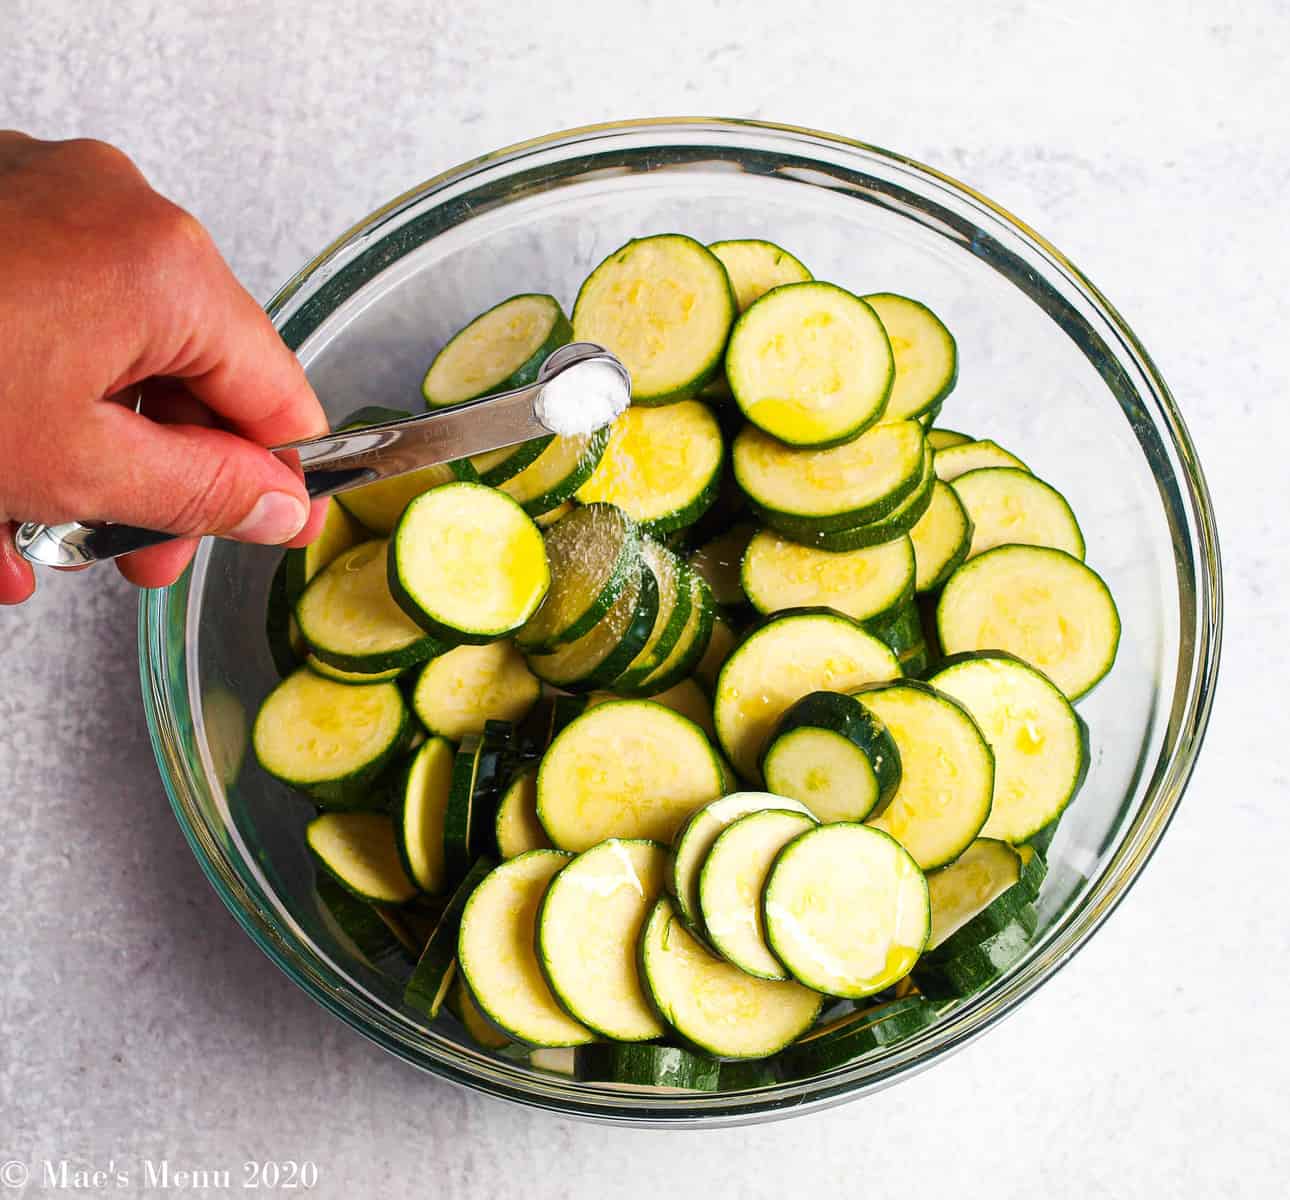 Pouring salt until a mixing bowl of zucchini